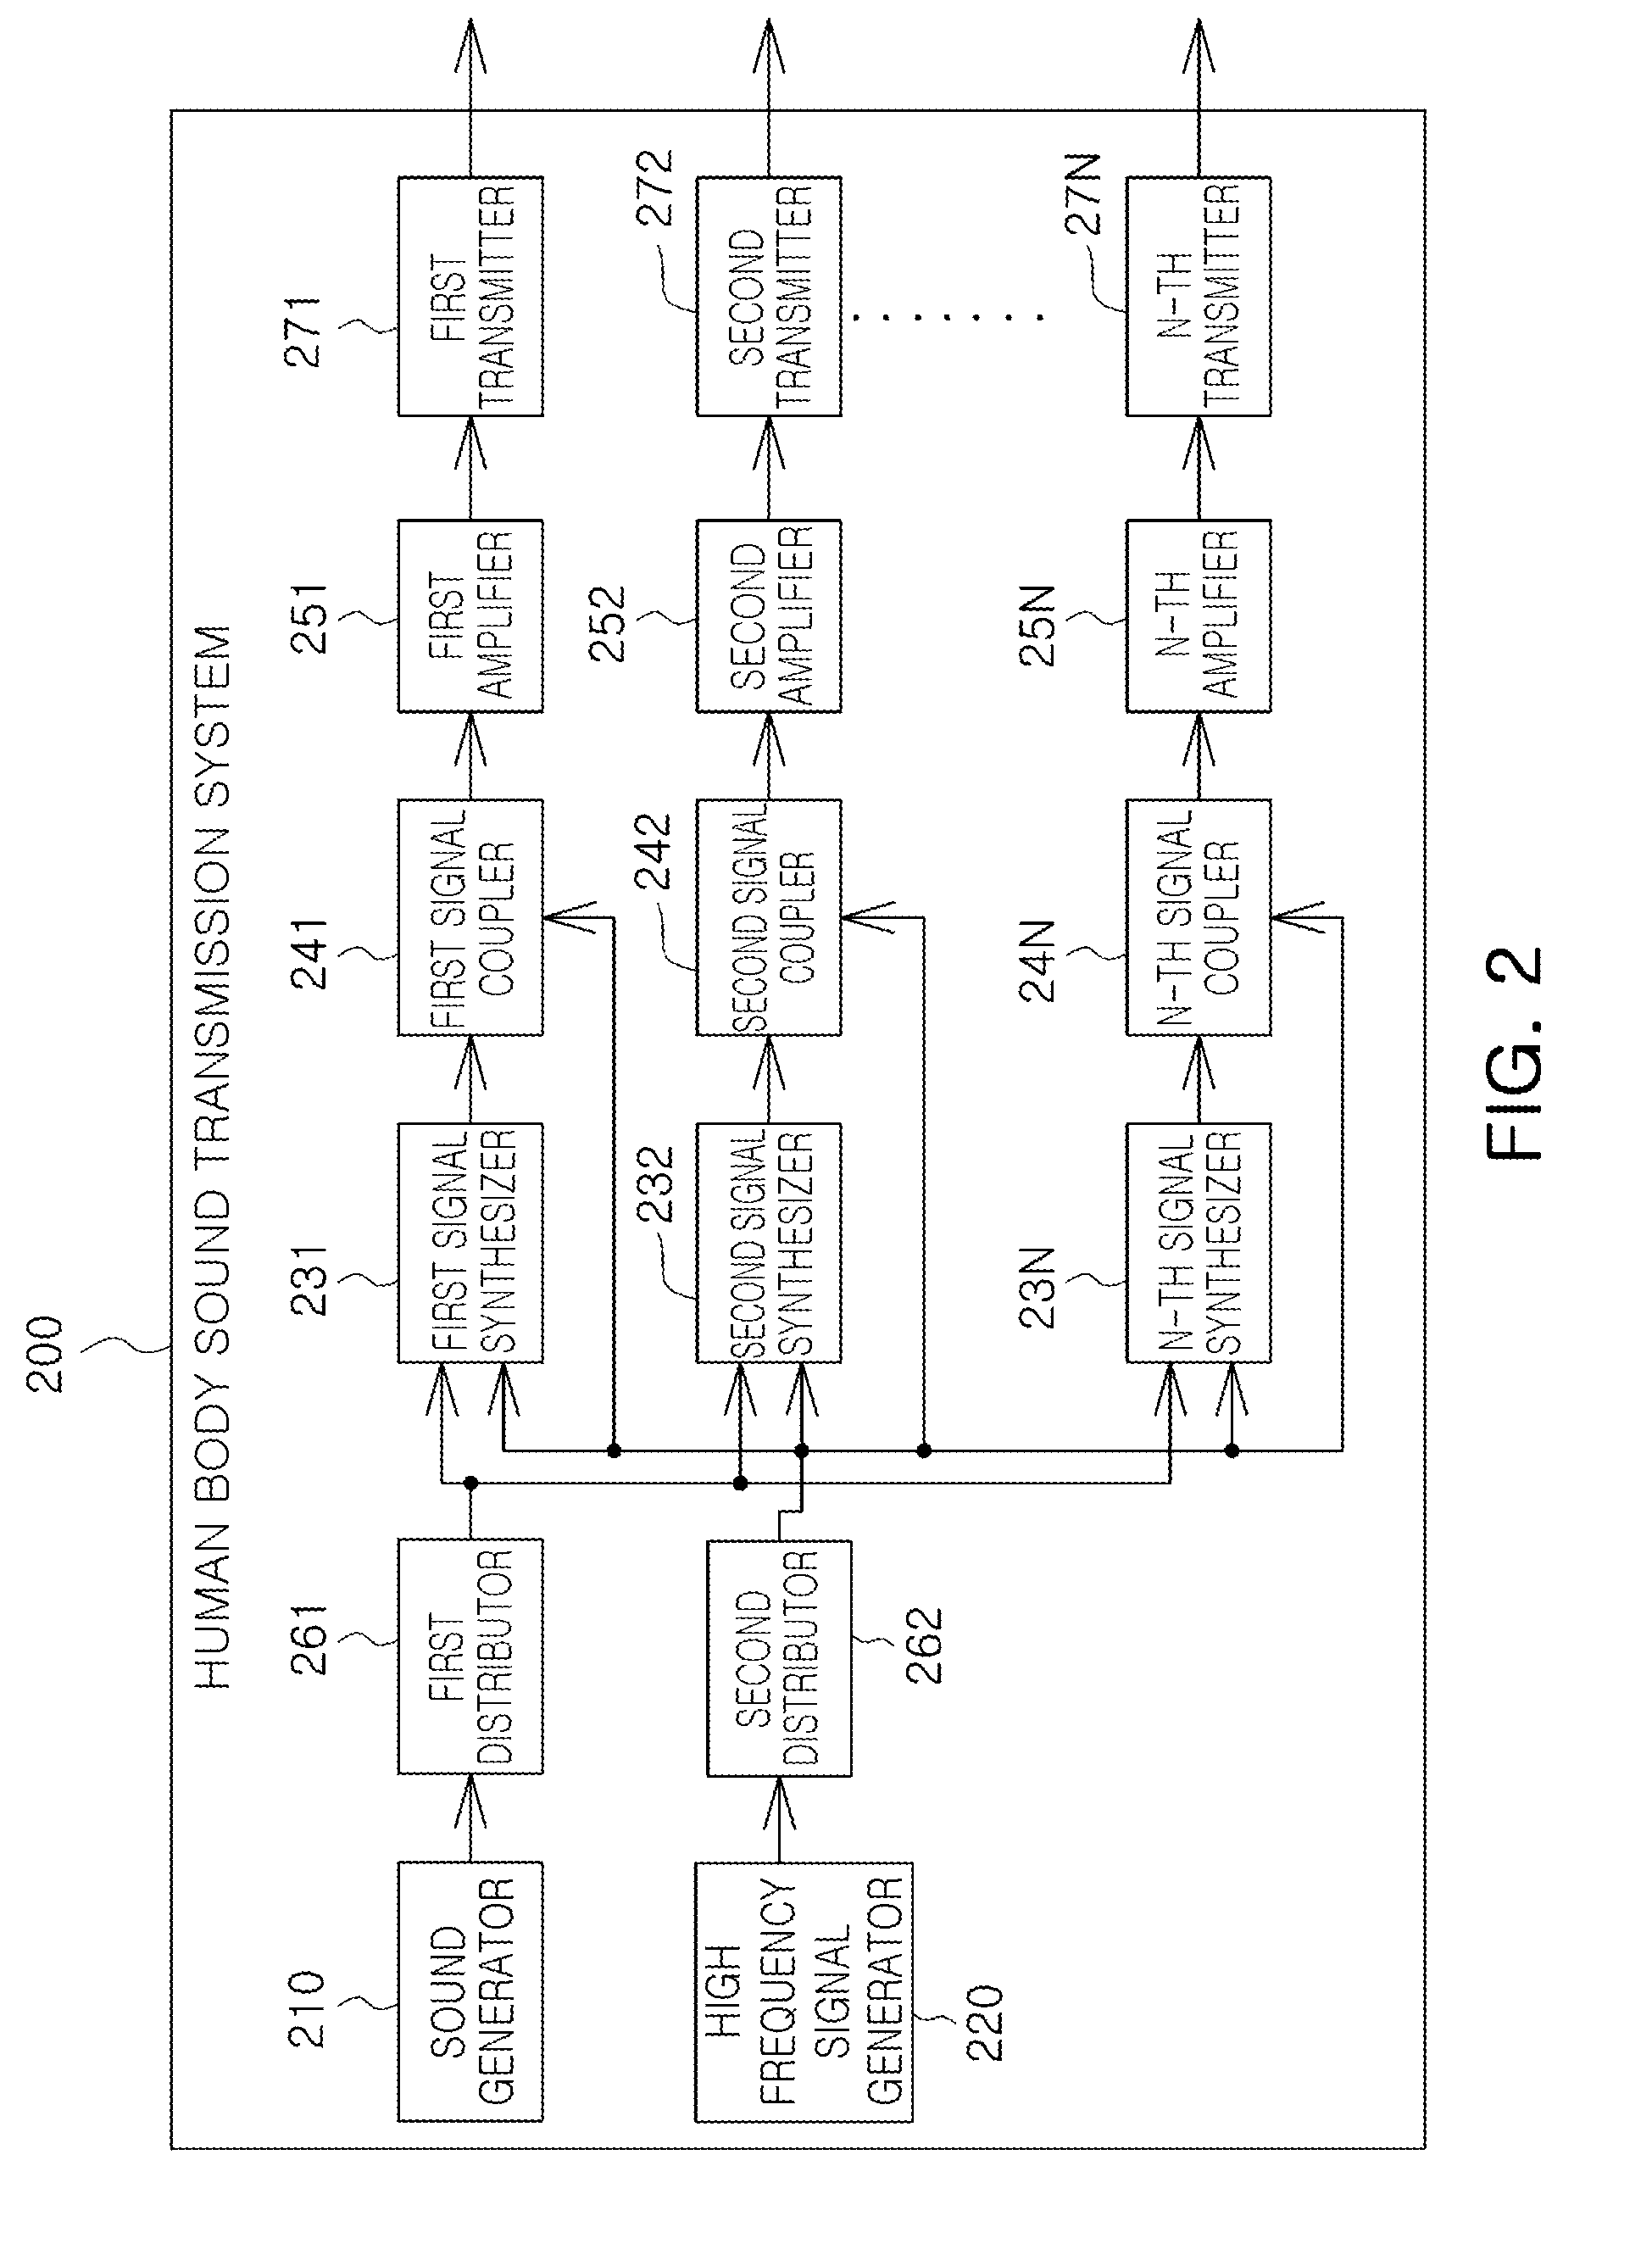 Human body sound transmission system and method for transmitting a plurality of signals